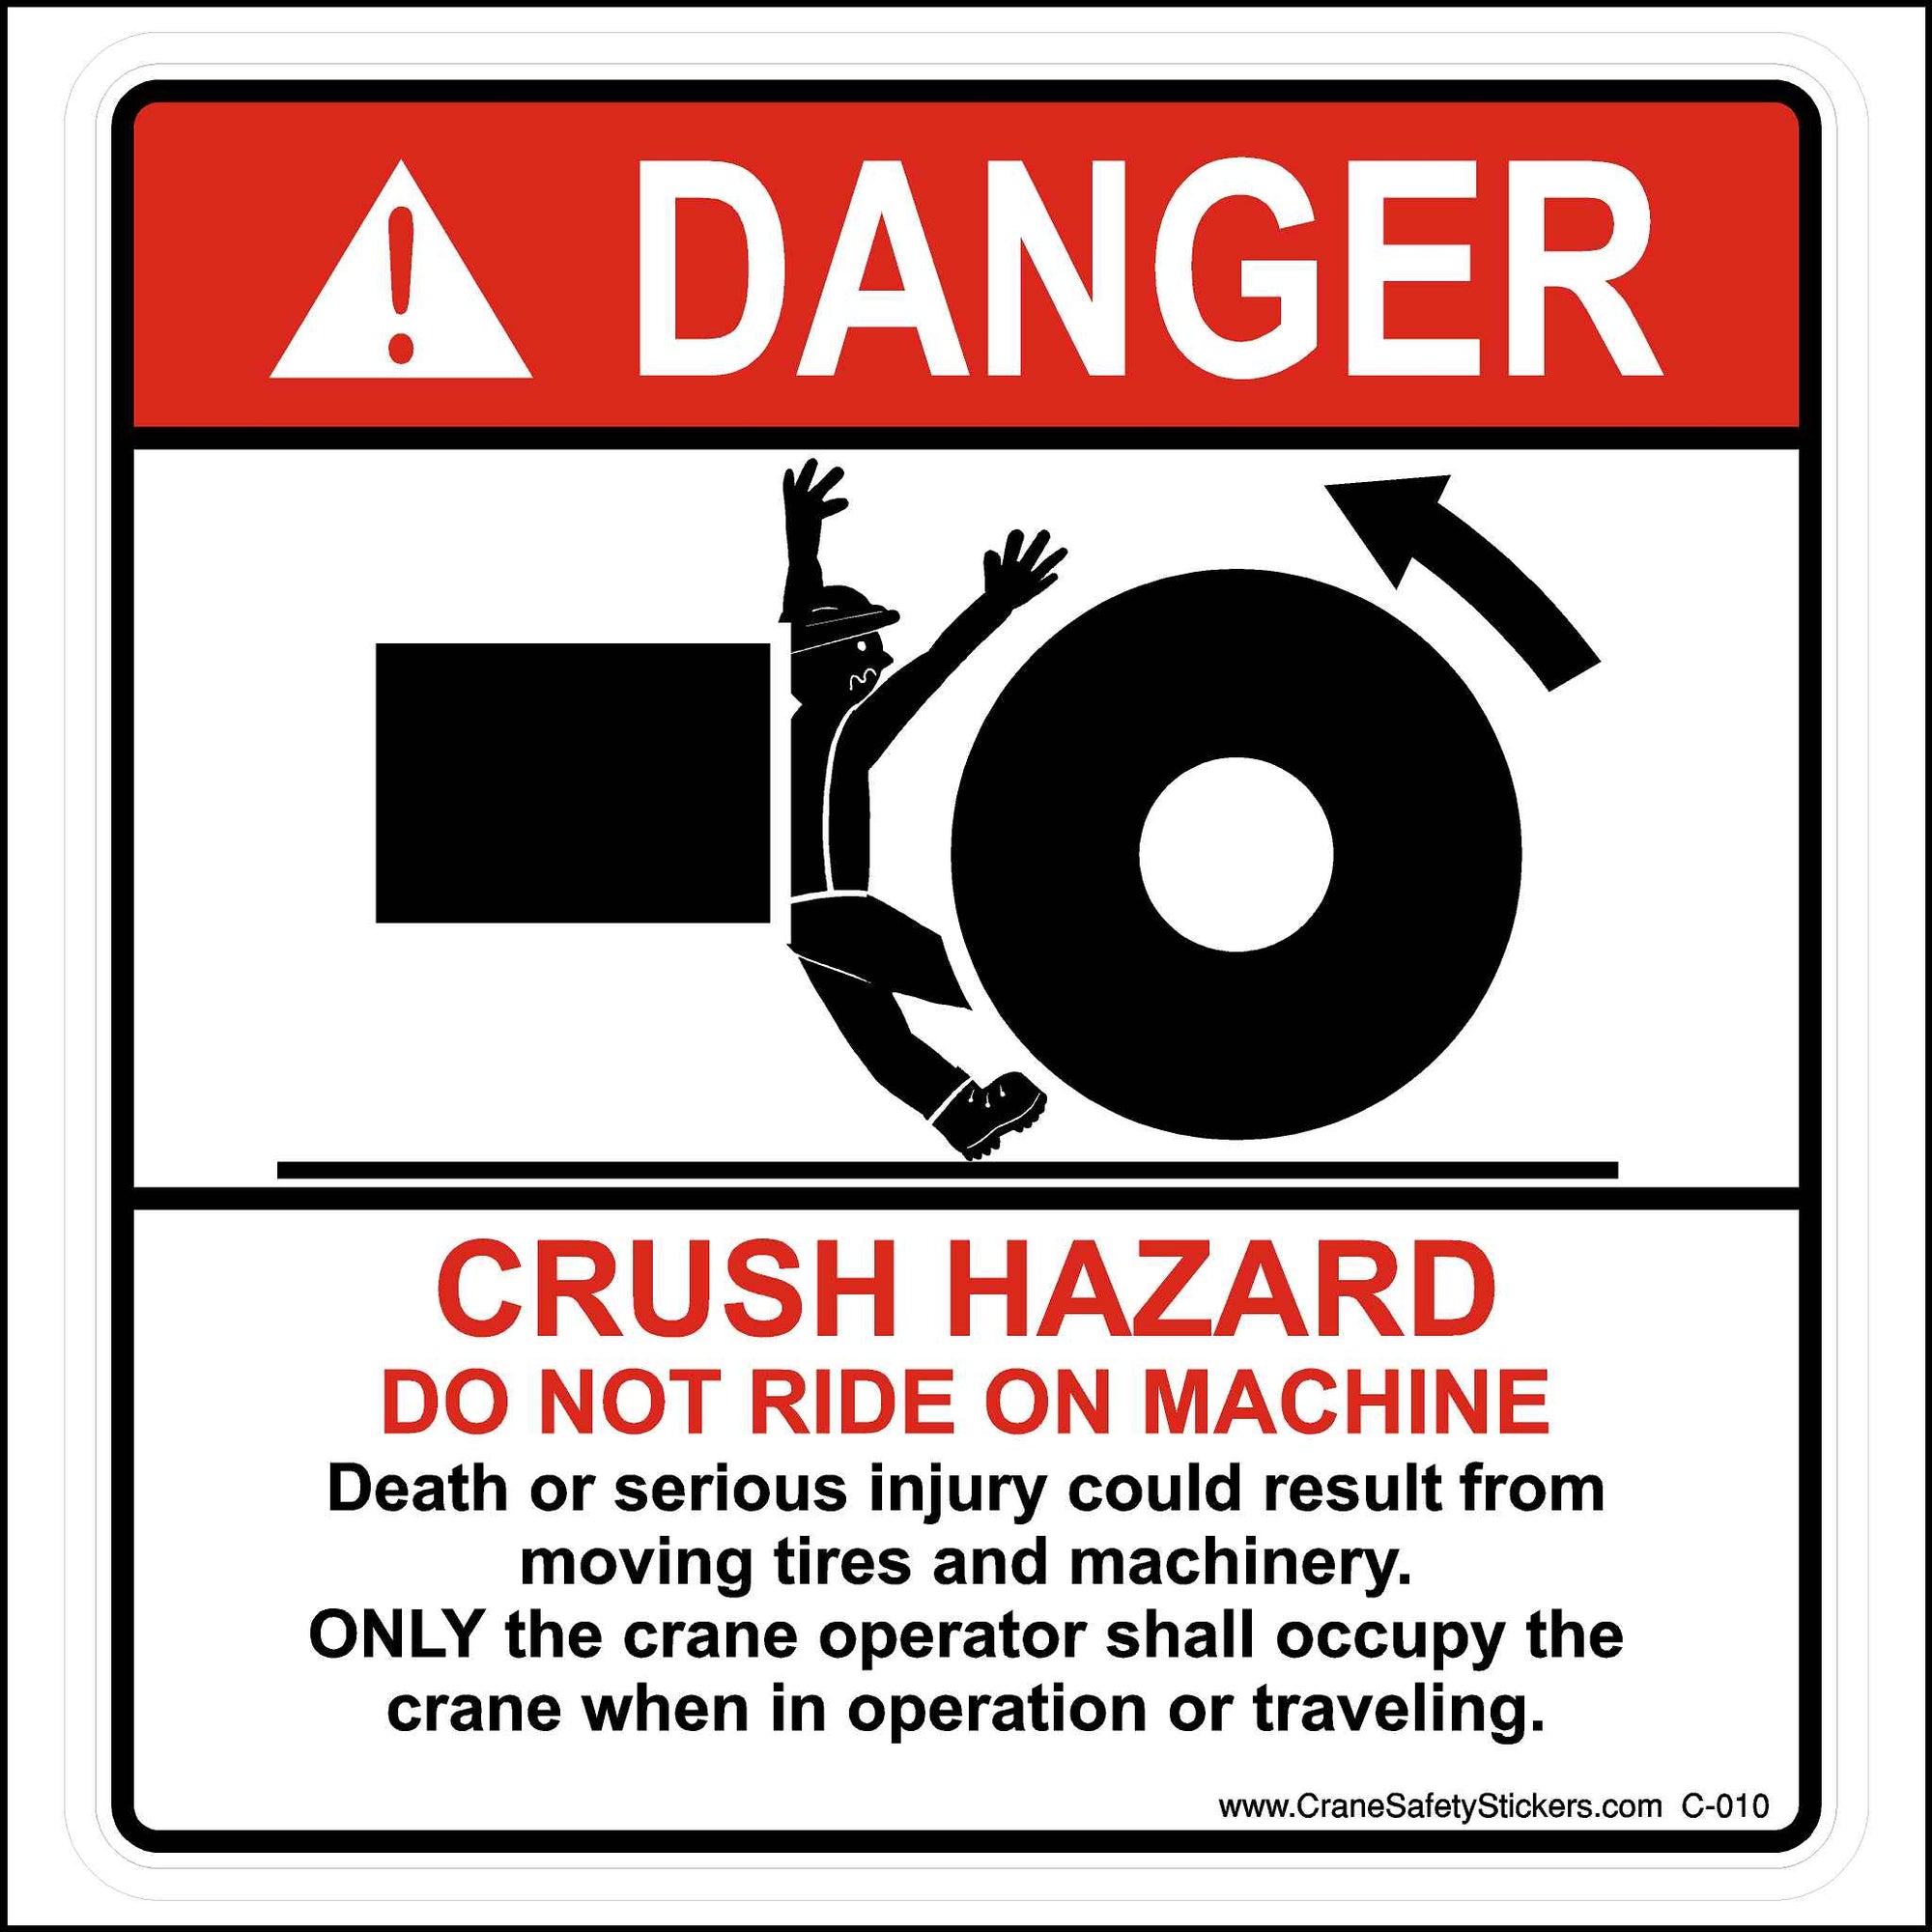 Crush hazard sticker printed with, crush hazard do not ride on machine, death or serious injury could result from moving tires and machenery, only the crane operator shall occupy the crane when in operation or traveling.